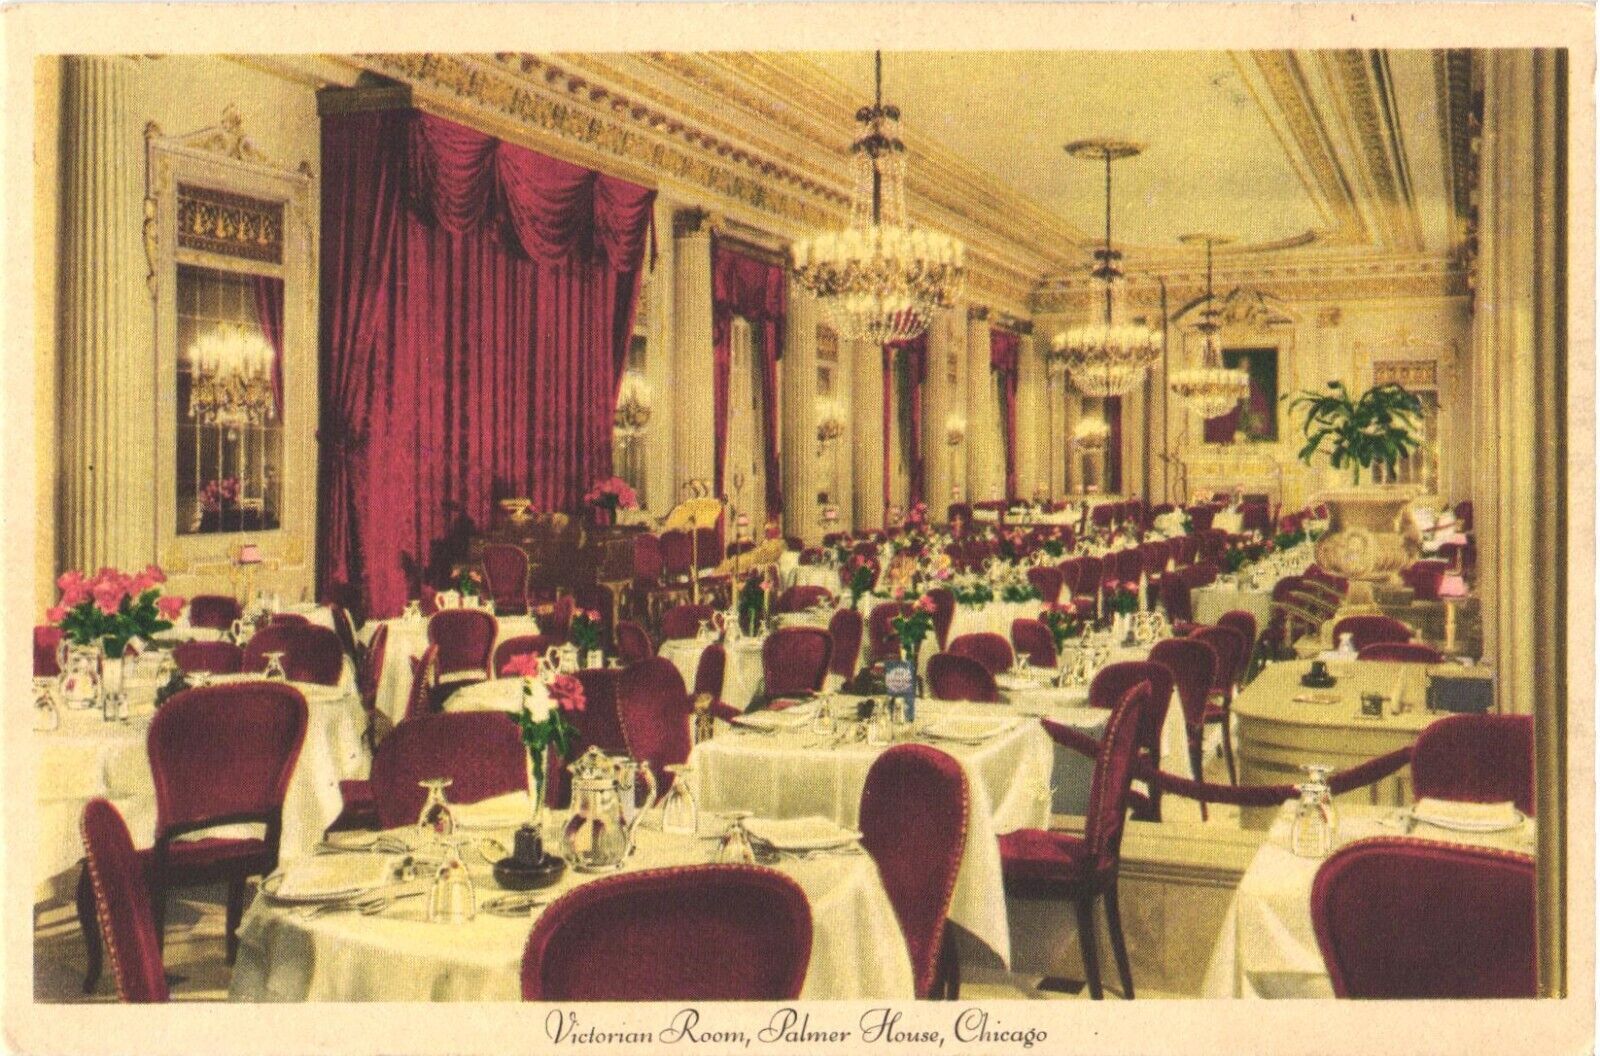 View Inside The Victorian Room, Palmer House, Chicago, Illinois Postcard